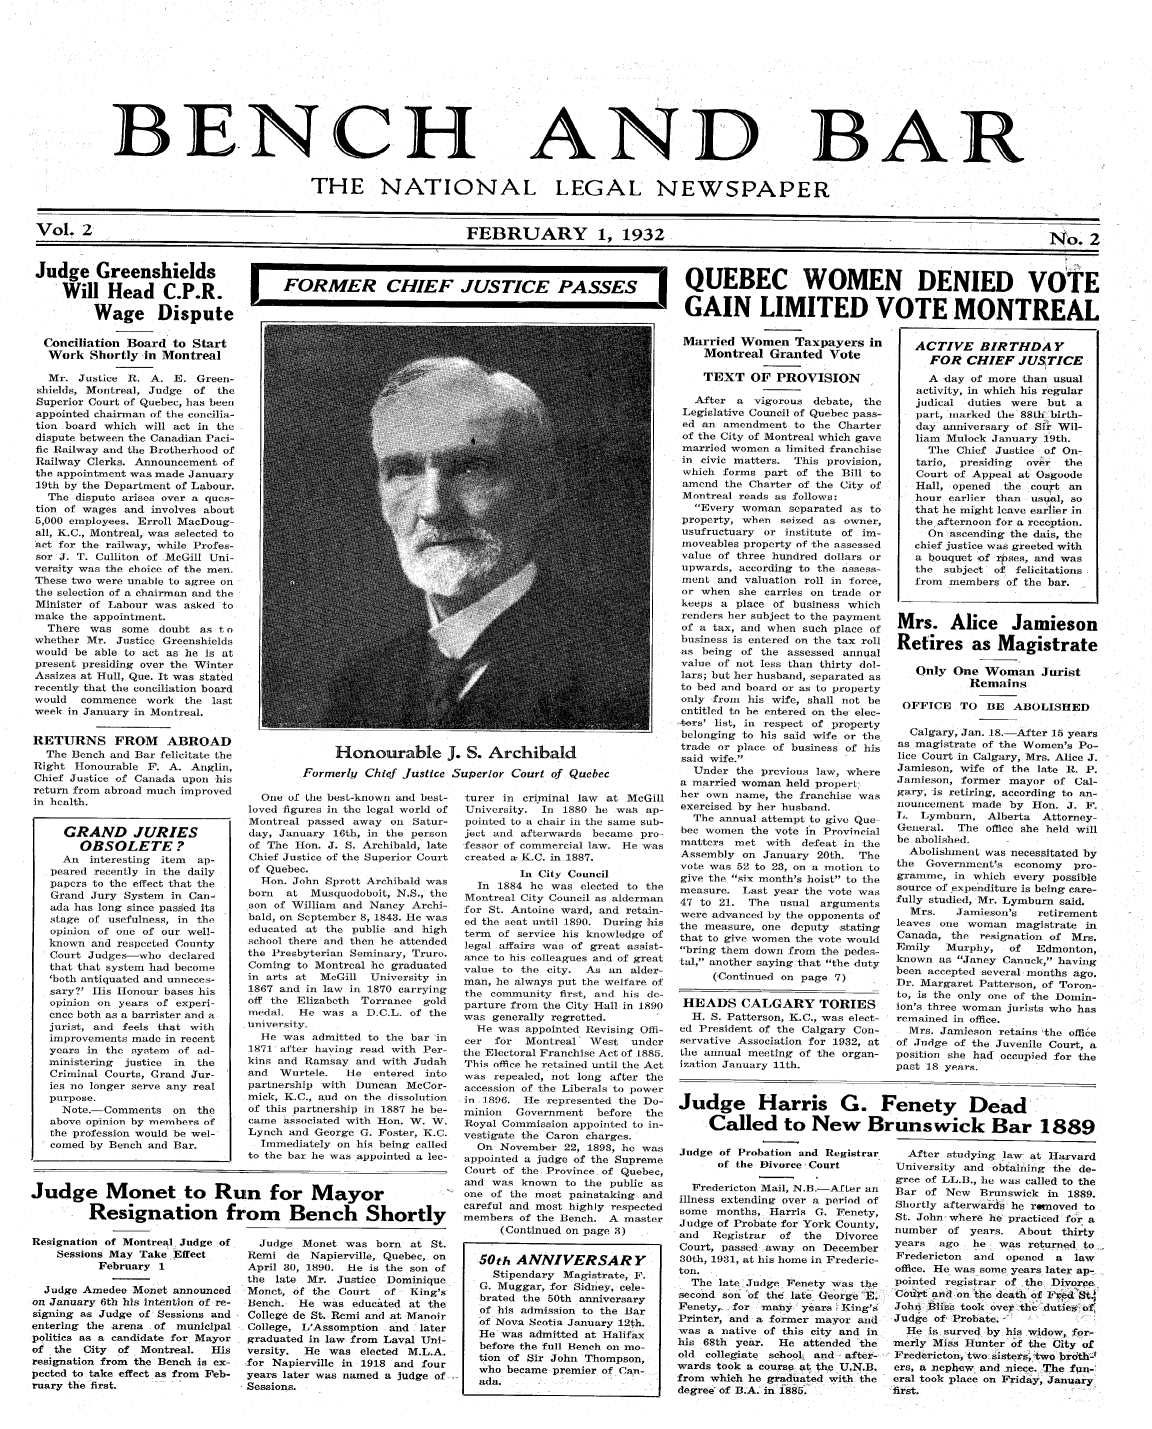 handle is hein.journals/bebalenw2 and id is 1 raw text is: BENCH

AND

BAR

THE NATIONAL LEGAL NEWSPAPER
Vol. 2                    FEBRUARY 1, 1932                    No. 2

Judge Greenshields
Will Head C.P.R.
Wage Dispute
Conciliation Board to Start
Work Shortly in Montreal
Mr. Justice R. A. E. Green-
shields, Montreal, Judge of the
Superior Court of Quebec, has been*
appointed chairman of the concilia-
tion board which will act in the
dispute between the Canadian Paci-
fic Railway and the Brotherhood of
Railway Clerks. Announcement of
the appointment was made January
19th by the Department of Labour.
The dispute arises over a ques-
tion of wages and involves about
5,000 employees. Erroll MacDoug-
all, K.C., Montreal, was selected to
act for the railway, while Profes-
sor J. T. Culliton of McGill Uni-
versity was the choice of the men.
These two were unable to agree on
the selection of a chairman and the
Minister of Labour was asked to
make the appointment.
There was some doubt as t o
whether Mr. Justice Greenshields
would be able to act as he is at
present presiding over the Winter
Assizes at Hull, Que. It was stated
recently that the conciliation board
would   commence work the last
week in January in Montreal.
RETURNS FROM ABROAD
The Bench and Bar felicitate the
Right Honourable F. A. Anglin,
Chief Justice of Canada upon his
return from abroad much improved
in health.
GRAND JURIES
OBSOLETE?
An   interesting item  ap-
peared recently in the daily
papers to the effect that the
Grand Jury System in Can-
ada has long since passed its
stage of usefulness, in the
opinion of one of our well-
known and respected County
Court Judges who declared
that that system had become
'both antiquated and unneces-
sary?' His Honour bases his
opinion on years of experi-
ence both as a barrister and a
jurist, and feels that with
improvements made in recent
years in the system of ad-
ministering  justice in  the
Criminal Courts, Grand Jur-
ies no longer serve any real
purpose.
Note. Comments on     the
above opinion by members of
the profession would be wel-
coned by Bench and Bar.

Resignation of Montreal Judge of
Sessions May Take Effect
February 1
Judge Amedee Monet announced
on January 6th his intention of re-
signing as Judge of Sessions and
entering the arena of municipal
politics as a candidate for Mayor
of the City of Montreal.     His
resignation from the Bench is ex-
pected to take effect as from Feb-
ruary the first.

r FORMER CHIEF JUSTICE PASS  QUEBEC WOMEN DENIED VOTE
GAIN LIMITED VOTE MONTREAL

t

Married Women Taxpayers in
Montreal Granted Vote
TEXT OF PROVISION
After a vigorous debate, the
Legislative Council of Quebec pass-
ed an amendment to the Charter
of the City of Montreal which gave
married women a limited franchise
in civic matters. This provision,
which forms part of the Bill to
amend the Charter of the City of
Montreal reads as follows:
Every woman separated as to
property, when seized as, owner,
usufructuary or institute of im-
moveables property of the assessed
value of three hundred dollars or
upwards, according to the assess-
ment and valuation roll in force,
or when she carries on trade or
keeps a place of business which
renders her subject to the payment
of a tax, and when such place of
business is entered on the tax roll
,as being of the assessed annual
value of not less than thirty dol-
lars; but her husband, separated as
to bed and board or as to property
only from his wife, shall not be
entitled to be entered on the elec-
-hors' list, in respect of property
belonging to his said wife or the
trade or place of business of his
said wife.
Under the previous law, where
a married woman held propert
her own name, the franchise was
exercised by her husband.
The annual attempt to give Que
bee women the vote in Provincial
matters met with defeat in the
Assembly on January 20th. The
vote was 52 to 28, on a motion to
give the six month's hoist to the
measure. Last year the vote was
47 to 21. The usual arguments
were advanced by the opponents of
the measure, one deputy stating
that to give women the vote would
bring them down from the pedes-
tal, another saying that the duty
(Continued on page 7)
HEADS CALGARY TORIES
H. S. Patterson, K.C., was elect-
ed President of the Calgary Con-
servative Association for 1932, at
the annual meeting of the organ-
ization January lth.

Judge Harris G. Fenety Dead
Called to New Brunswick Bar 1889

Judge of Probation and Registrar
of the Divorce Court
Fredericton Mail, N.B.-AfLer an
illness extending over a period of
some months, Harris G. Fenety,
Judge of Probate for York County,
and  Registrar  of the   Divorce
Court, passed away on December
30th, 1981, at his home in Frederic-
ton.
The late Judge Fenety was the
second son- of the late George E.
Fenety, . for many. years King's
Printer, and a former mayor and
was a native of this city and in
his 68th year. He attended the
old collegiate school, and- after-
wards took a course at the U.N.B.
from which he graduated with the
degree- of B.A. in 1885.

After studying law at Harvard
University and obtaining the de-
gree of LL.B., lie was called to the
Bar of New    Brunswick in 1889.
Shortly afterwards he ronoved to
St. John-where he practiced for a
number of years. About thirty
years  ago   he  was returned to
Fredericton  and  opened  a  law
office. He was some years later ap-.
pointed registrar of the Divorc.
Court and 'on the death of Fe  S.f
John Bliss took over- thu duties of
Judge of Probate. -
He is surved by his widow, for-
merly Miss Hunter of the City of
Fredericton, two: sisters two hrdth-J
ers, a nephew, and niece. -The fun-,
eral took place on Friday, January
first.

One of the best-know
loved figures in the lg
Montreal passed away
day, January 16th, in
of The Hon. J. S. Arc
Chief Justice of the Sup
of Quebec.
Hon. John Sprott Ar
born  at Musquodoboi
son of William and Ns
bald, on September 8, 1
educated at the publi
school there and then
the Presbyterian Semin
Coming to Montreal he
in arts at McGill U
1867 and in law in 18'
off the Elizabeth Tor
medal. He was a D.I
university.
He was admitted to
1871 after having reac
kins and Ramsay and
and Wurtele.    He e
partnership with Dune
mick, K.C., and on the
of this partnership in
came associated with I
Lynch and George G.
Immediately on his
to the bar he was appo

Judge Monet was b
Remi de Napierville,
April 30, 1890. He is
the late Mr. Justice
Monet, of the Court
Bench. He was educe
College de St. Remi an
College, L'Assomption
graduated in law from
versity.  He was elec
for Napierville in 191
years later was named
Sessions.

n and best-
al world of
on Satur-
the person
hibald, late
)erior Court

turer in criminal law at McGill
University. In 1880 he was ap-
pointed to a chair in the same sub-
ject and afterwards became pro-
fessor of commercial law. He was
created a- K.C. in 1887.

In City Council
chibald was     In 1884 he was elected to the
t, N.S., the  Montreal City Council as alderman
ancy Archi-   for St. Antoine ward, and retain-
843. He was   ed the seat until 1890. During his
c and high    term of service his knowledge of
he attended  legal affairs was of great assist-
ary, Truro.  ance to his colleagues and of great
graduated   value to the city. As an alder-
niversity in  man, he always put the welfare of
70 carrying   the community first, and his de-
rance gold   parture from the City Hall in 1890
C.L. of the   was generally regretted.
He was appointed Revising Offi-
the bar in   cer  for  Montreal West under
d with Per-  the Electoral Franchise Act of 1885.
with Judah   This office he retained until the Act
ntered into   was repealed, not long after the
can McCor-    accession of the Liberals to power
dissolution  in 1896. He represented the Do-
1887 he be-  minion   Government   before  the
Ion. W. W.    Royal Commission appointed to in-
Foster, K.C.  vestigate the Caron charges.
being called    On November 22, 1898, he was
inted a lee-  appointed a judge of the Supreme
Court of the Province of Quebec,
and was known to the public as
*  one of the most painstaking and
careful and most highly respected
or         members of the Bench. A master
(Continued on page 3)
orn at St.
Quebec, on      50th ANNIVERSARY
the son of        Stipendary Magistrate, F.
Dominique      G. Muggar, for Sidney, cele-
of  King's     brated the 50th anniversary
.ted at the
of his admission to the Bar
I at Man oir    of Nova Scotia January 12th.
and later      He was admitted at Halifax
Laval Uni-      before the full Bench on mo-
ted M.L.A.      tion of Sir John Thompson,
8 and four      who became premier of Can-
a judge of     ada.

ACTIVE BIRTHDA Y
FOR CHIEF JUSTICE
A day of more than usual
activity, in which his regular
judical duties were but a
part, nlarked the 88th birth-
day anniversary of Sir Wil-
liam Mulock January 19th.
The Chief Justice of On-
tario, presiding  over  the
Court of Appeal at Osgoode
Hall, opened  the court an
hour earlier than usual, so
that he might leave earlier in
the afternoon for a reception.
On ascending the dais, the
chief justice was greeted with
a bouquet  of roses, and was
the subject of felicitations
from members of the bar.

Honourable J. S. Archibald
Formerly Chief Justice Superior Court of Quebec

Judge Monet to Run for Mayor
Resignation from Bench S

I

I

Mrs. Alice Jamieson
Retires as Magistrate
Only One Woman Jurist
Remains
OFFICE TO BE ABOLISHED
Calgary, Jan. 18.After 15 years
as magistrate of the Women's Po-
lice Court in Calgary, Mrs. Alice J.
Jamieson, wife of the late R. P.
Jamieson, former mayor of Cal-
gary, is retiring, according to an-
nouncement made by Hon. J. F.
L. Lymburn, Alberta     Attorney-
General. The office she held will
be abolished.
Abolishment was necessitated by
the Government's economy     pro-
gramme, in which every possible
source of expenditure is being care-
fully studied, Mr. Lymburn said.
Mrs.    Jamieson's   retirement
leaves one woman magistrate in
Canada, the resignation of Mrs.
Emily   Murphy,    of  Edmonton,
known as Janey Canuck, having
been accepted several months ago.
Dr. Margaret Patterson, of Toron-
to, is the only one of the Domin-
ion's three woman jurists who has
remained in office.
Mrs. Jamieson retains the office
of Judge of the Juvenile Court, a
position she had occupied for the
past 18 years.


